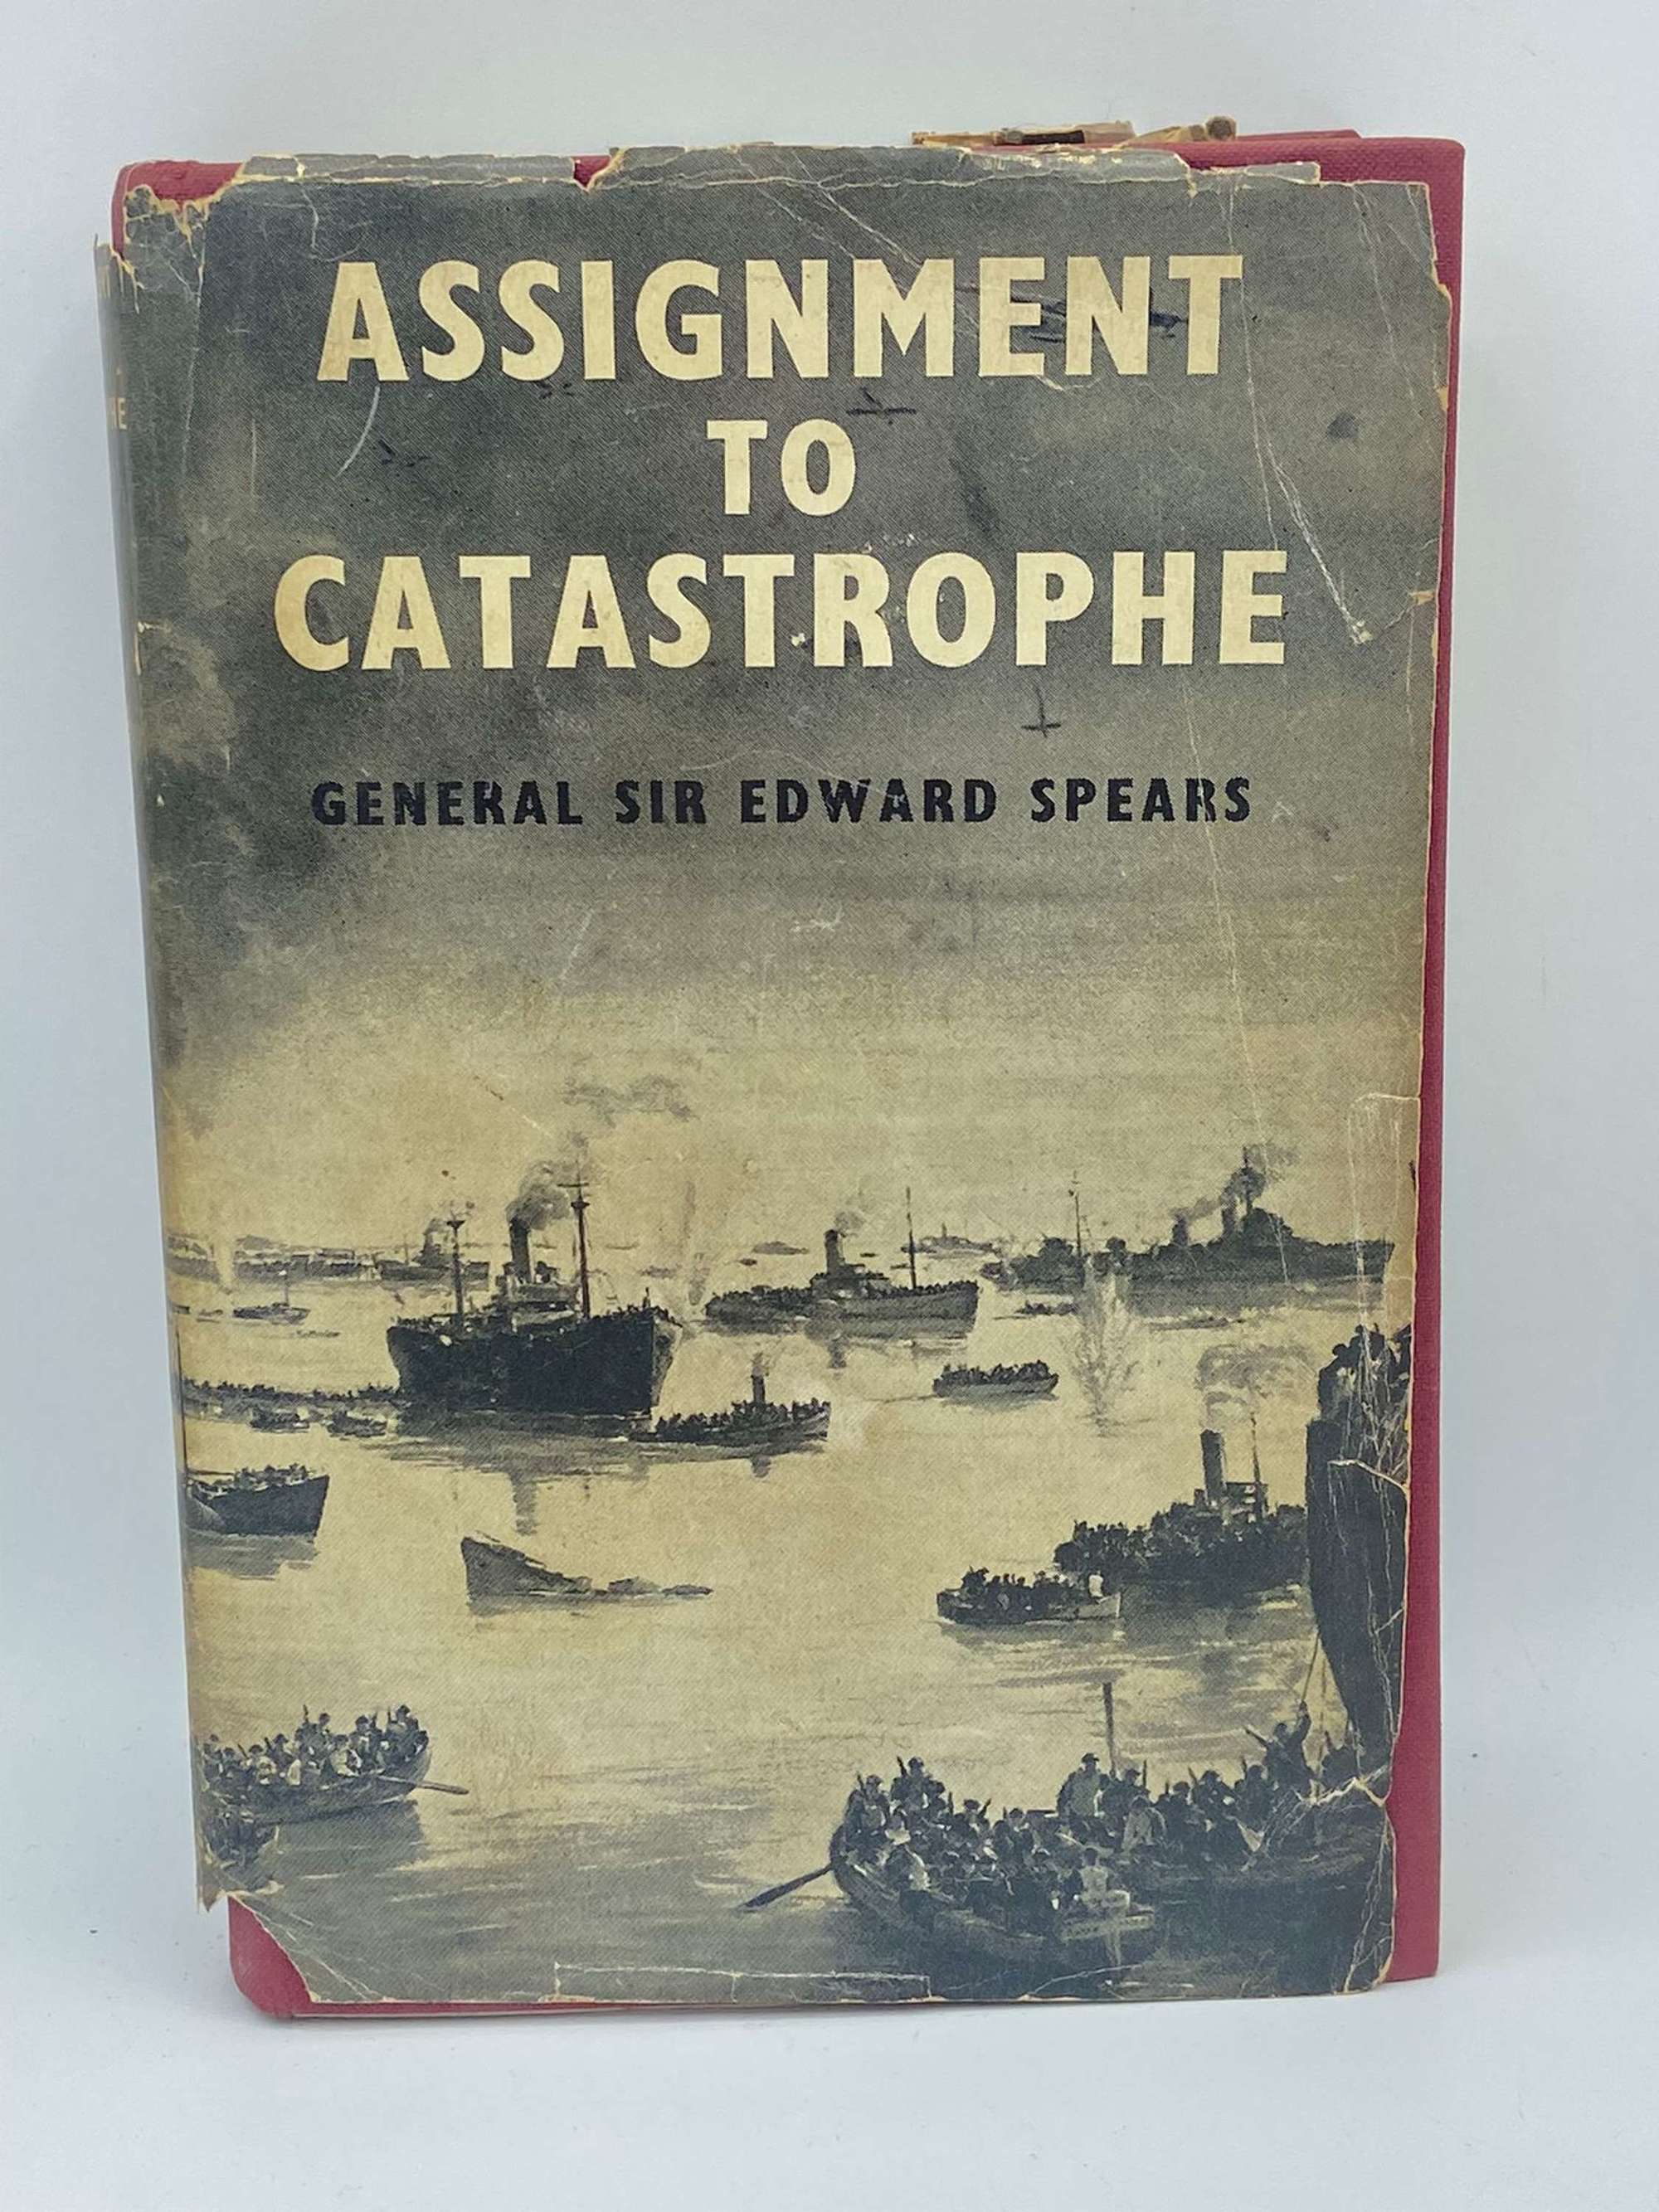 WW2 Assignment To Catastrophe by Major General Sir Edwards Spears